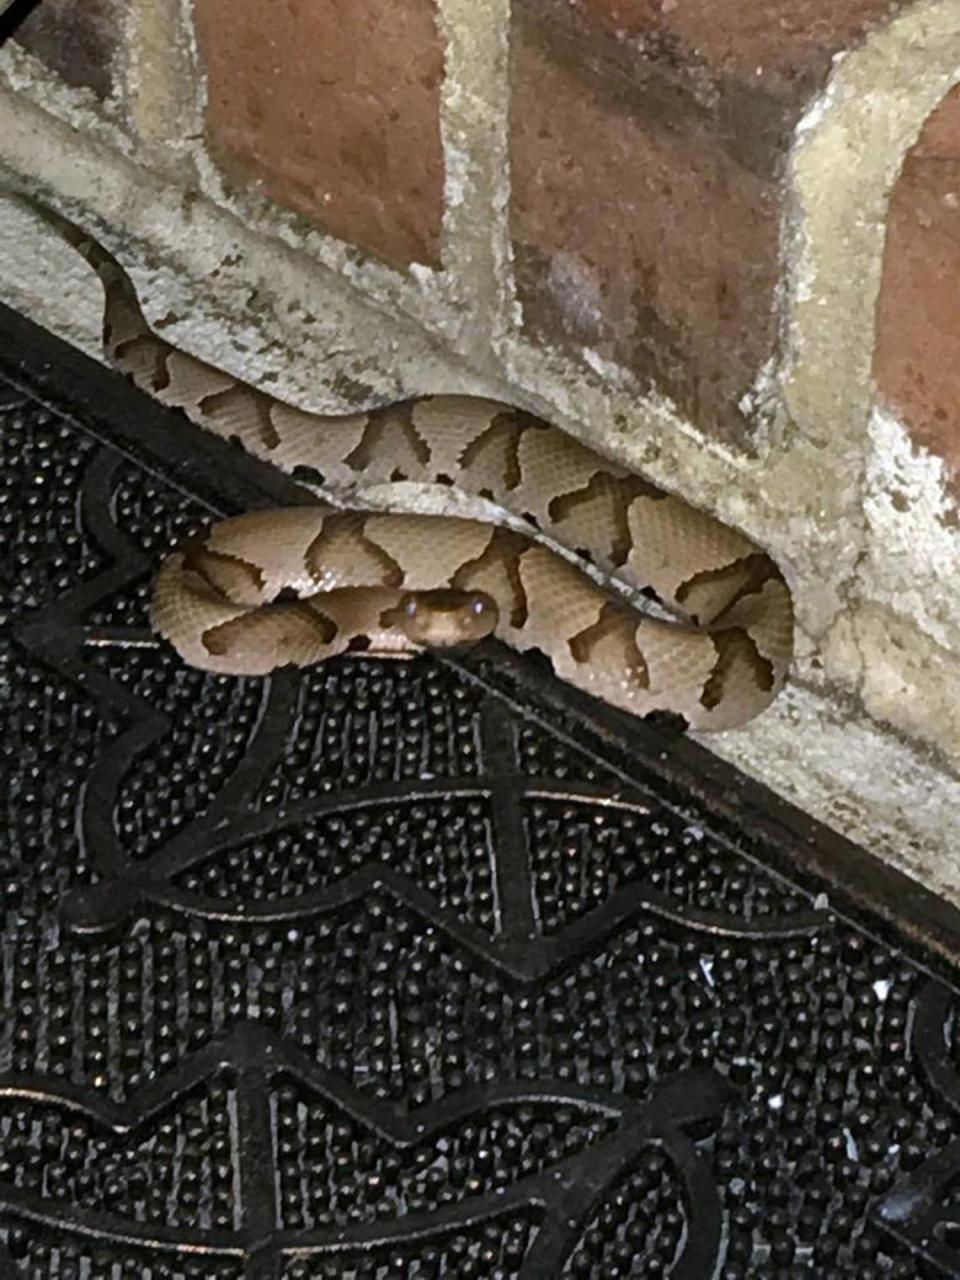 Filiz Hughes of Cary photographed this copperhead on her neighbor’s front porch welcome mat on April 28, 2017. It was dark and she did not see the snake as she approached to ring the door bell. Her dog Daisy jumped and alerted her, saving her from a potential bite. She did not know if Daisy had been bitten. She took the photograph in case she needed to identify the snake.